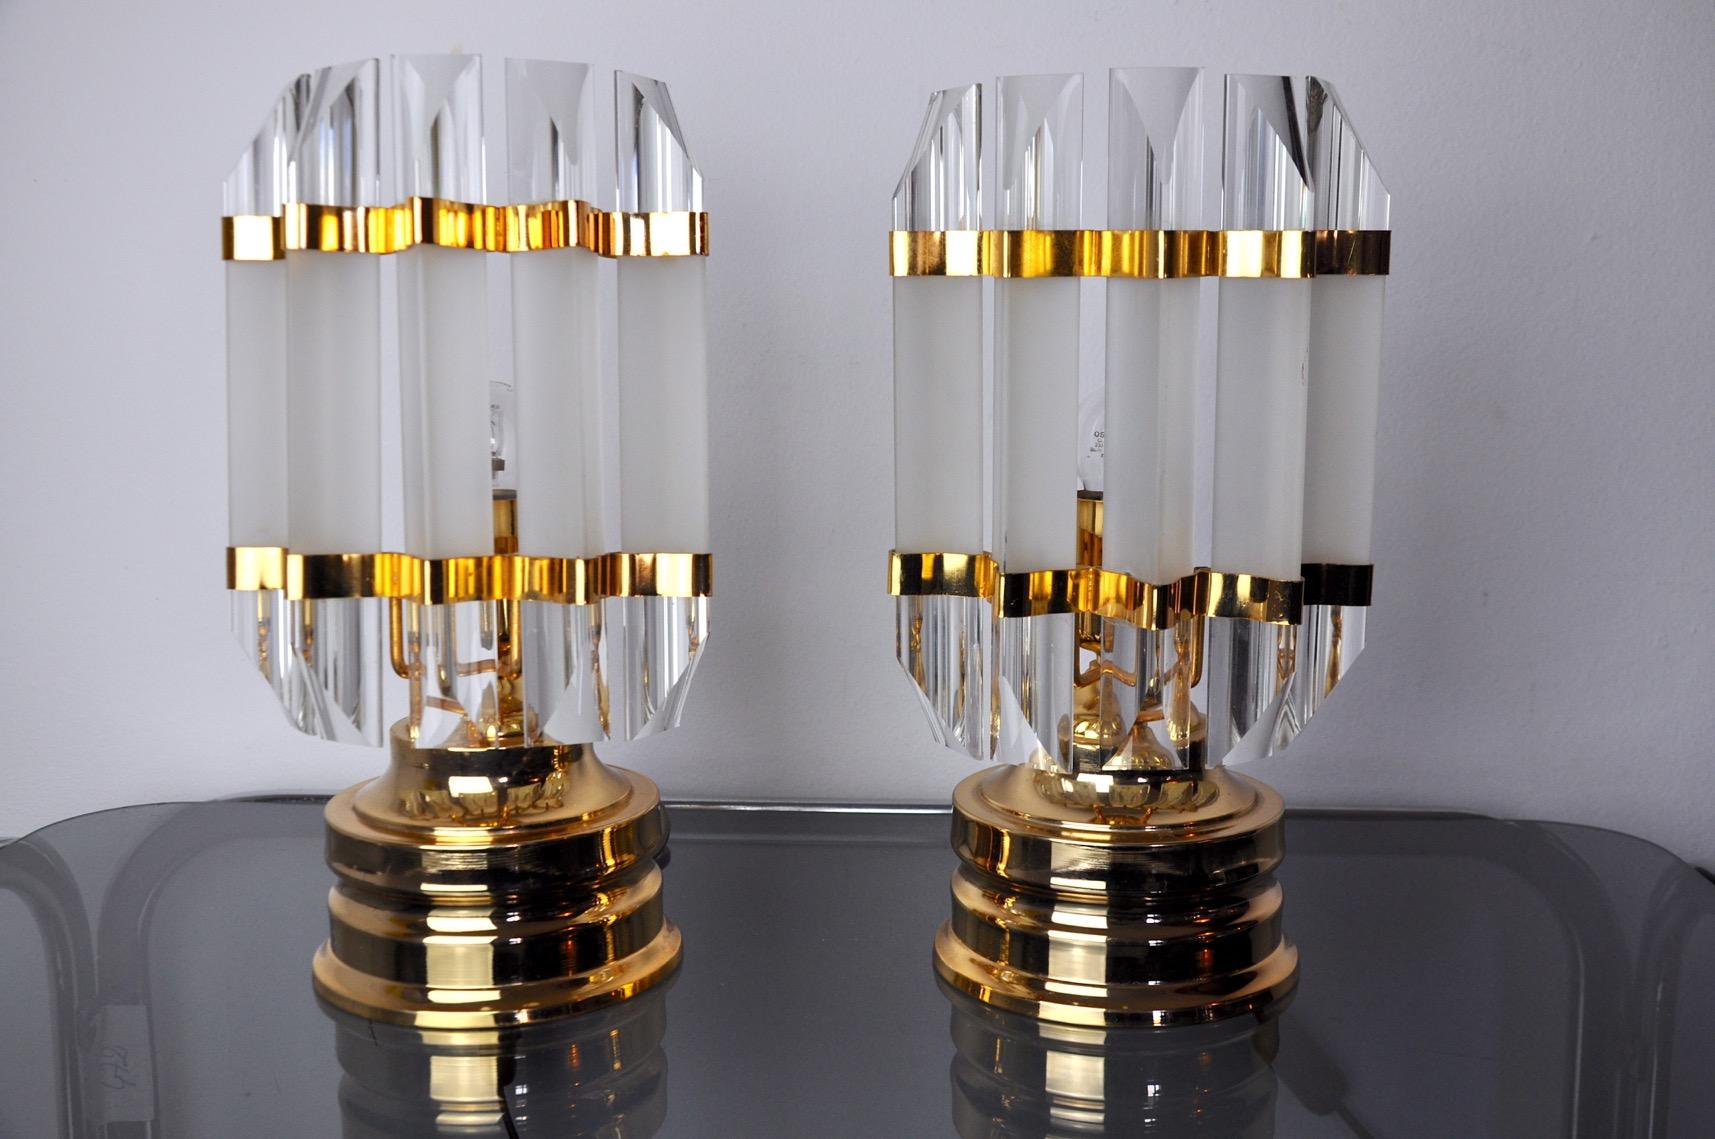 Very nice pair of venini lamps produced in italy in the 70s. Golden metal structure and cut glass. Unique objects that will illuminate marvelously and bring a real design touch to your interior. Electricity checked, mark of time relating to the age